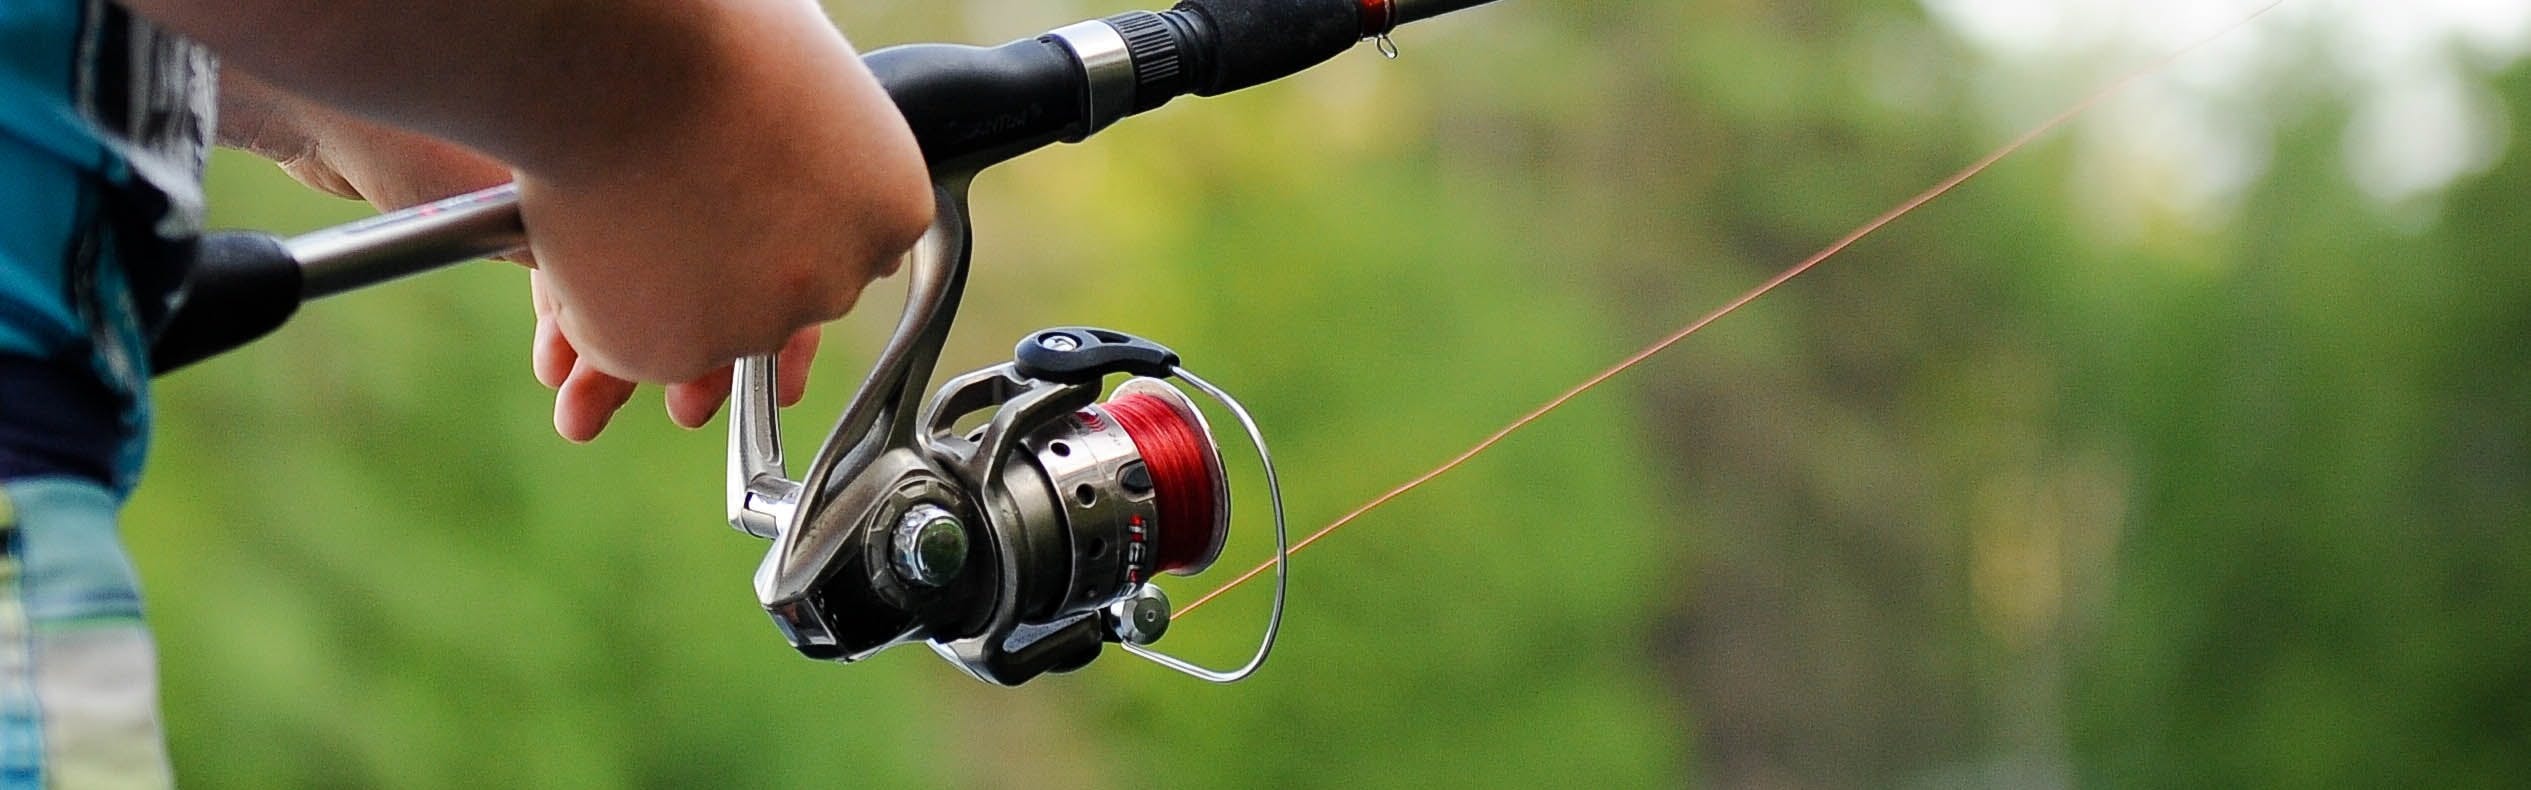 The Most Exciting New Gear from Daiwa for 2022